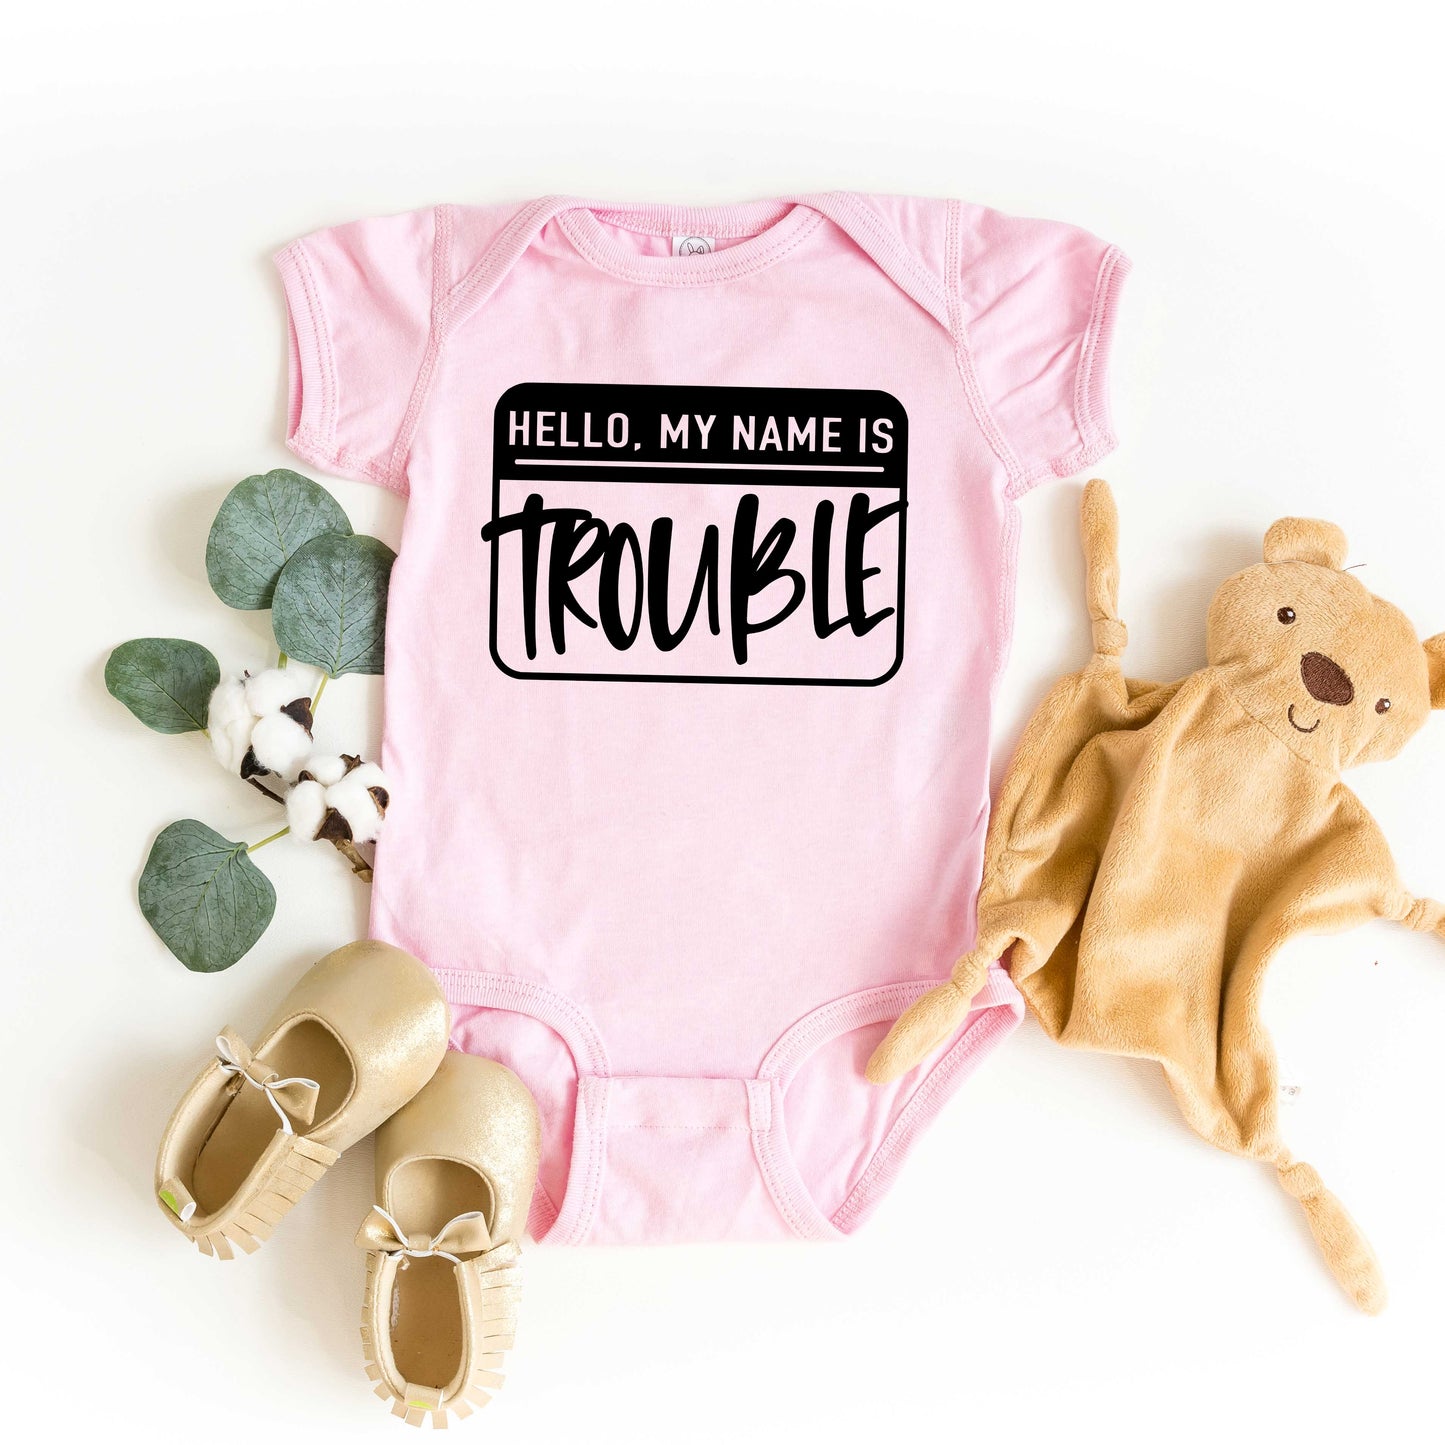 Hello My Name Is Trouble | Baby Graphic Short Sleeve Onesie